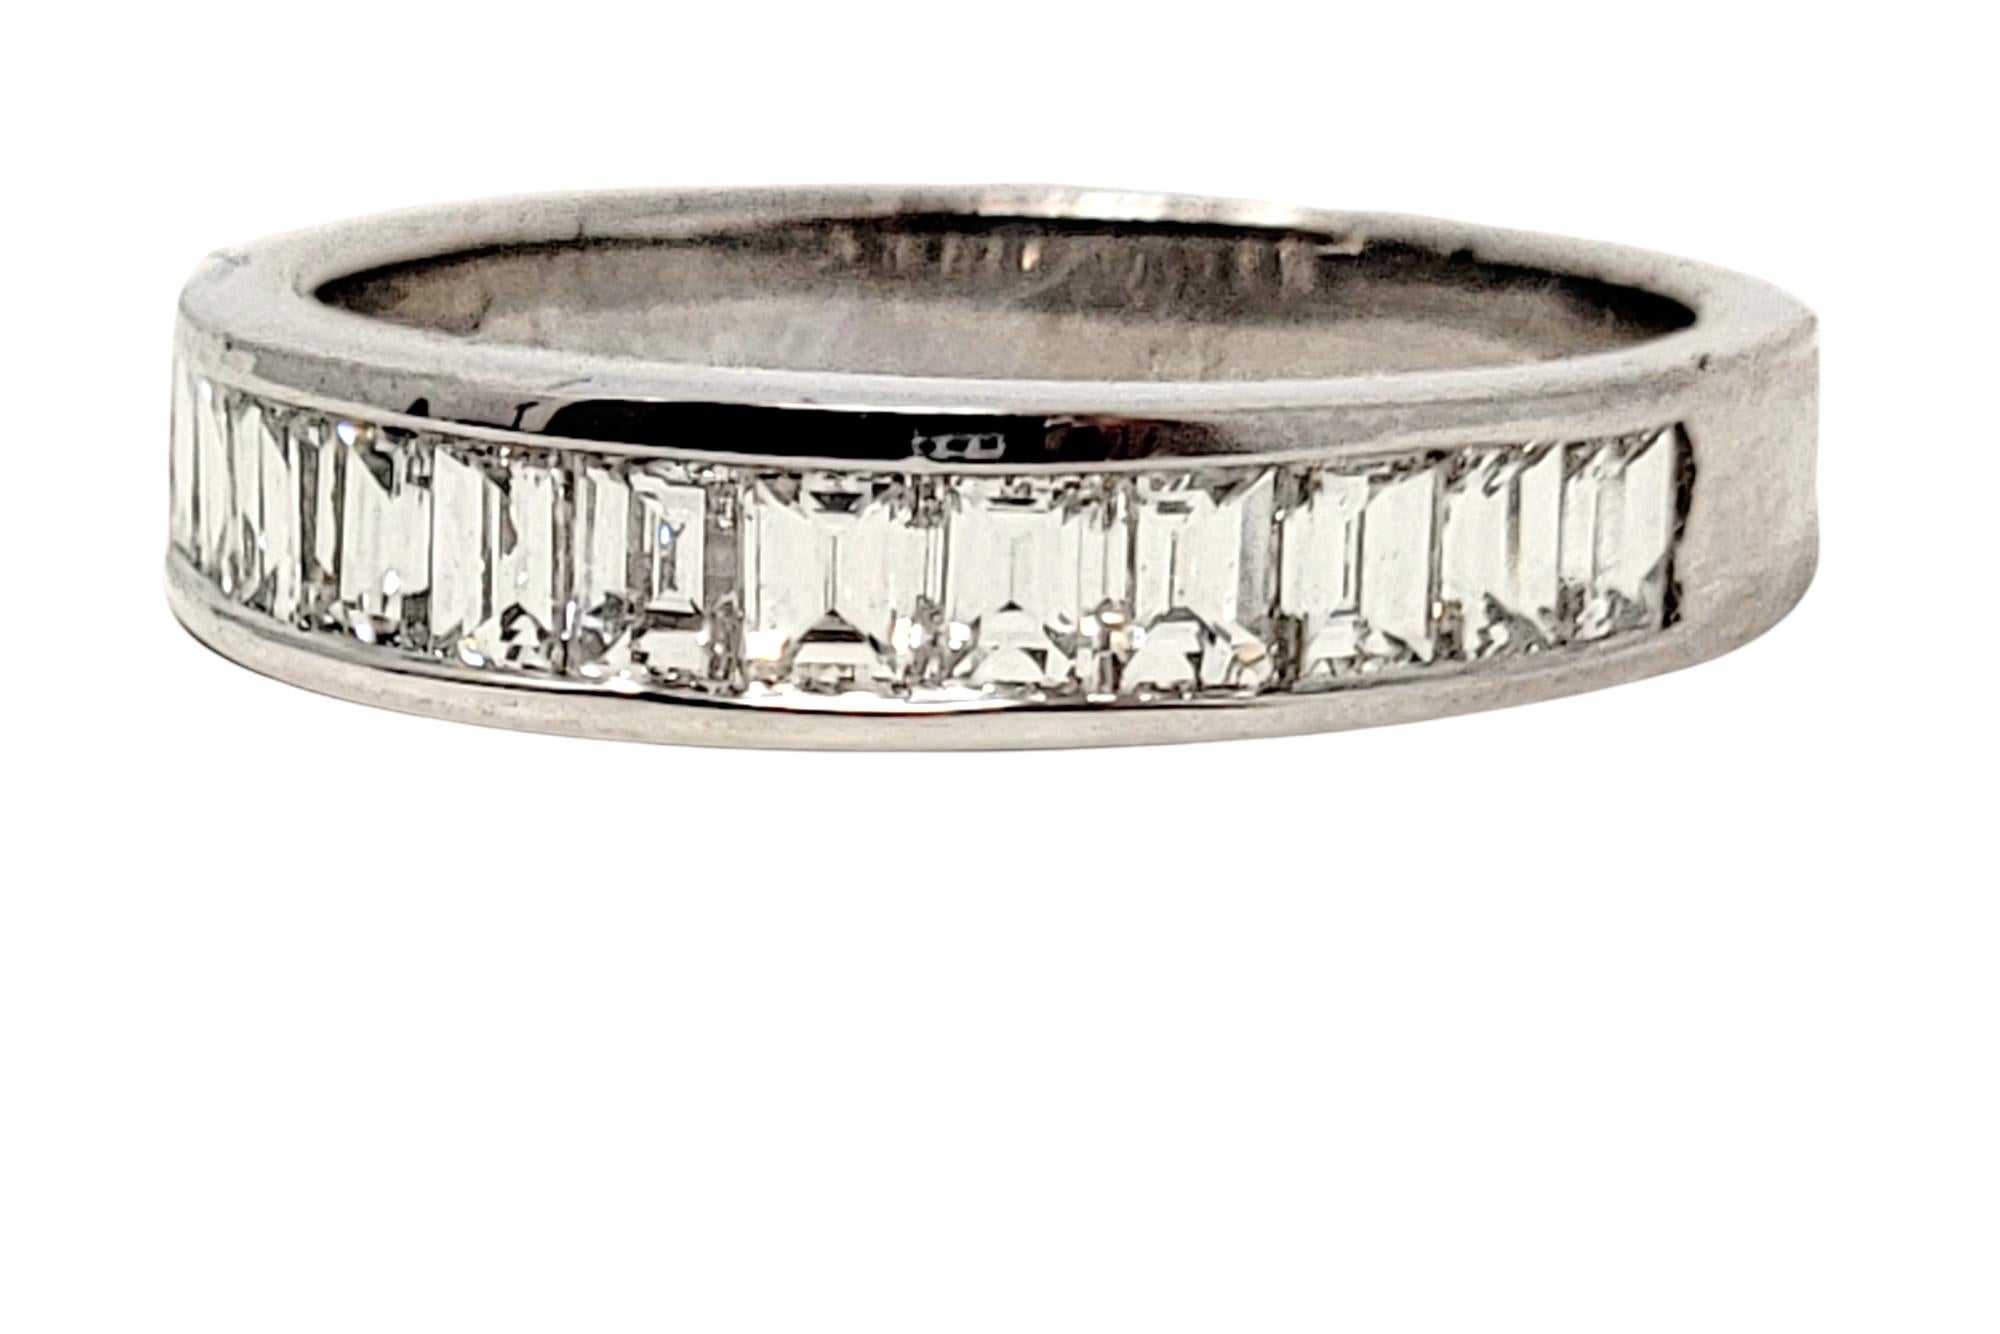 Ring size: 6

Absolutely gorgeous sleek diamond band ring featuring icy white emerald cut diamonds channel set in a single elegant row. This modern beauty would look fantastic paired with an engagement ring, but is equally beautiful just on its own.